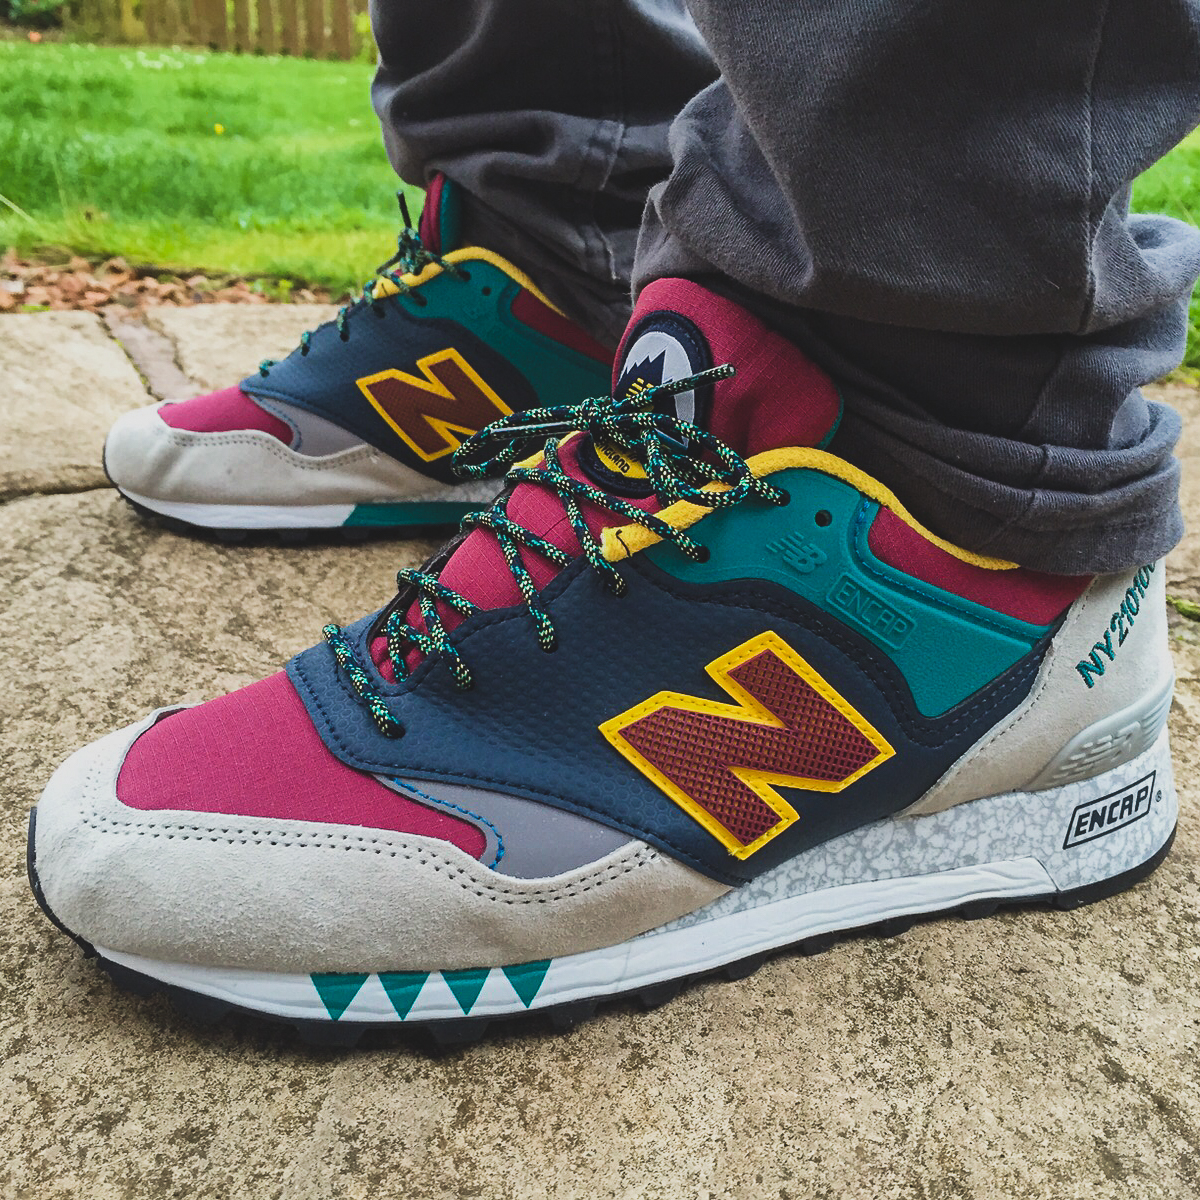 New Balance 577 “The Napes” Pack | New 